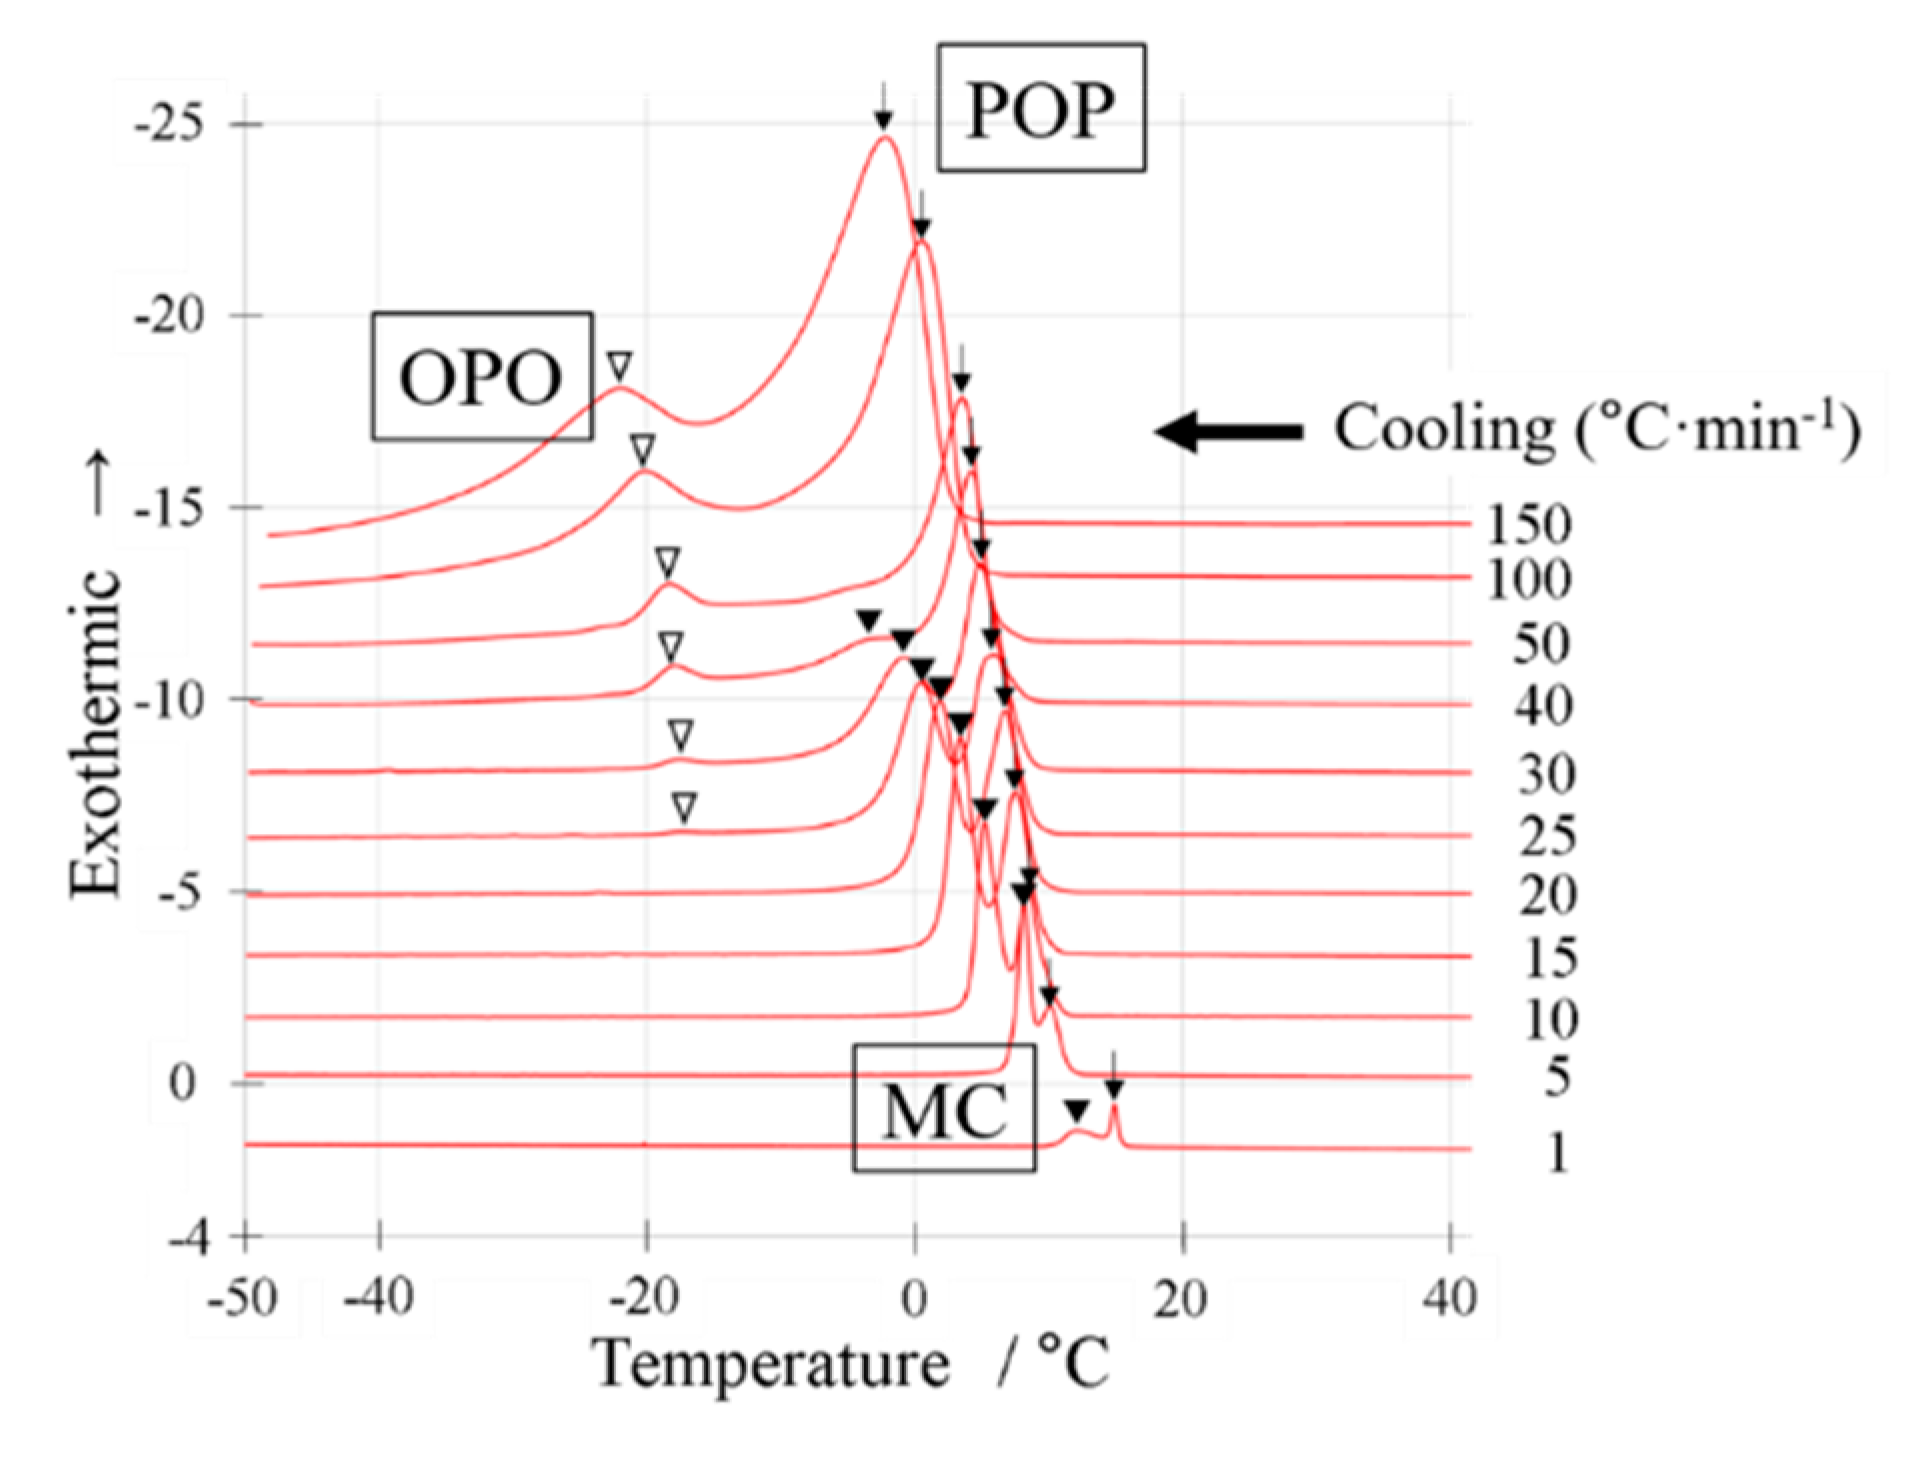 Molecules | Free Full-Text | Mixing Ratio and Cooling Rate Dependence of  Molecular Compound Formation in OPO/POP Binary Mixture | HTML